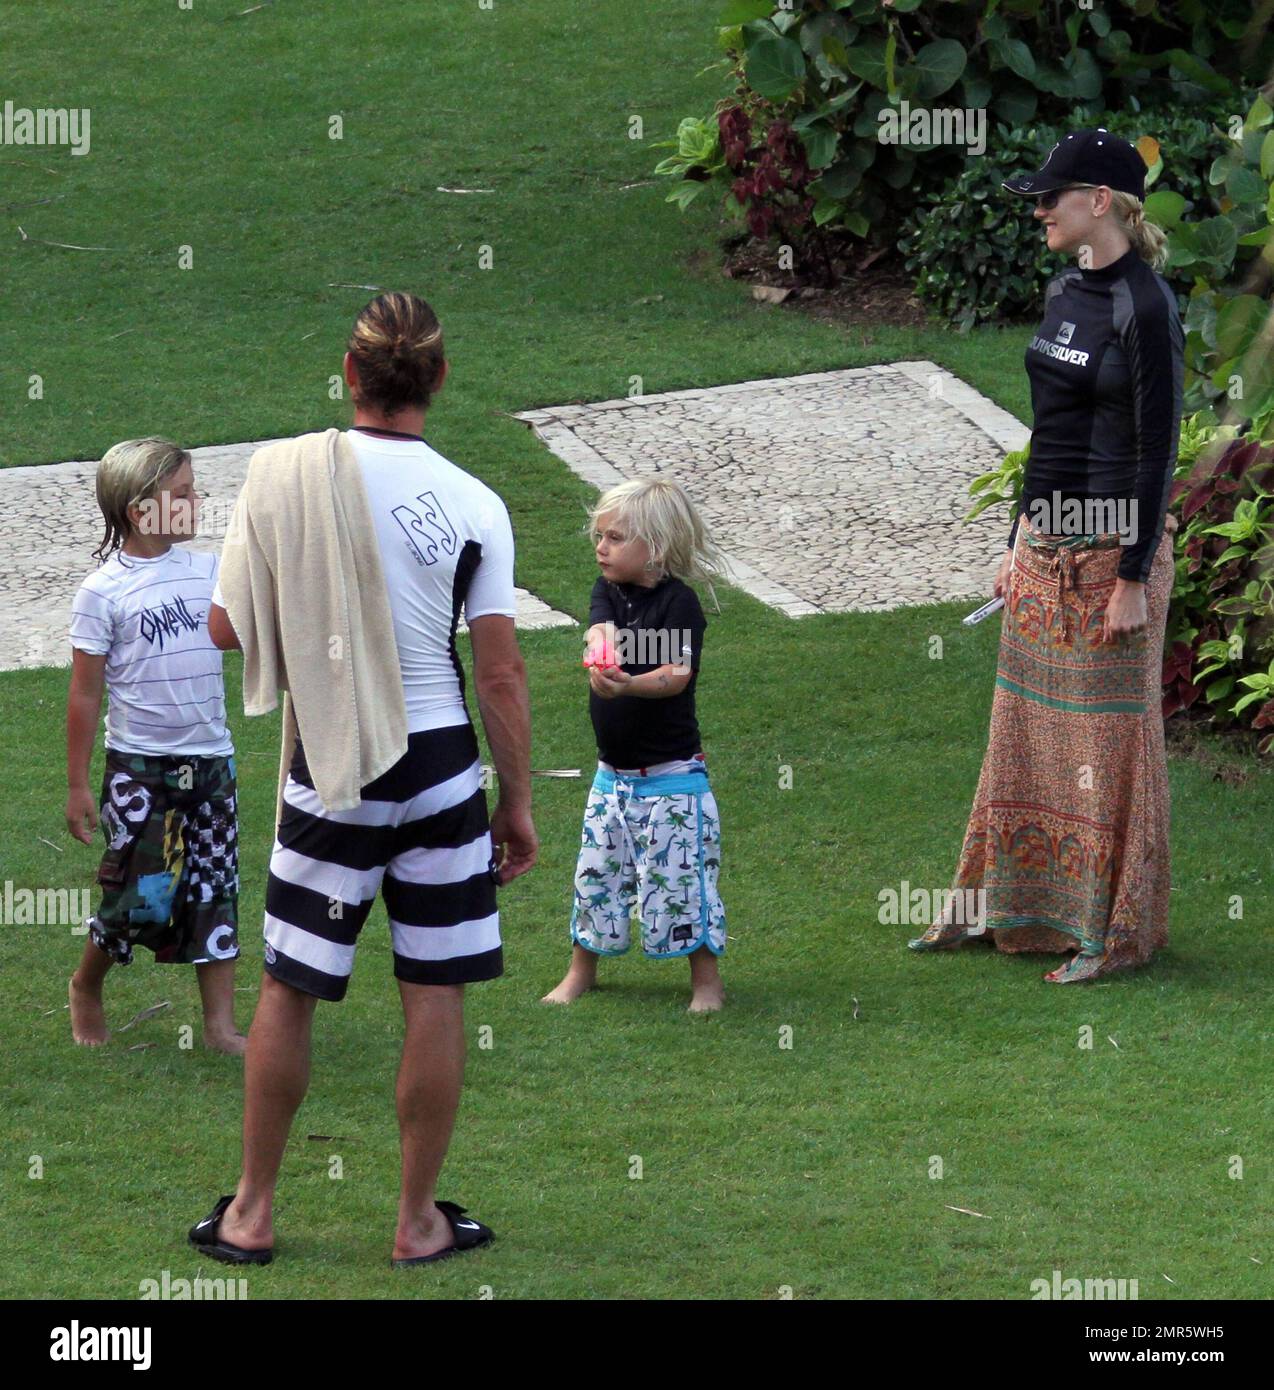 EXCLUSIVE!! Gwen Stefani, husband Gavin Rossdale and the couple's two children Kingston and Zuma spend a fun afternoon playing American Football on the lawn of their luxury hotel. Gavin tried to show Gwen how to throw the ball properly while the boys were more interested in playing in the fountain and filling up their water pistols. Gwen stayed covered up in a surfer's top, baseball cap and sarong and stayed in the shade as much as possible. She was also spotted texting and checking her messages on her iPhone while Gavin played with the kids. The family are spending time together ahead of Gavi Stock Photo